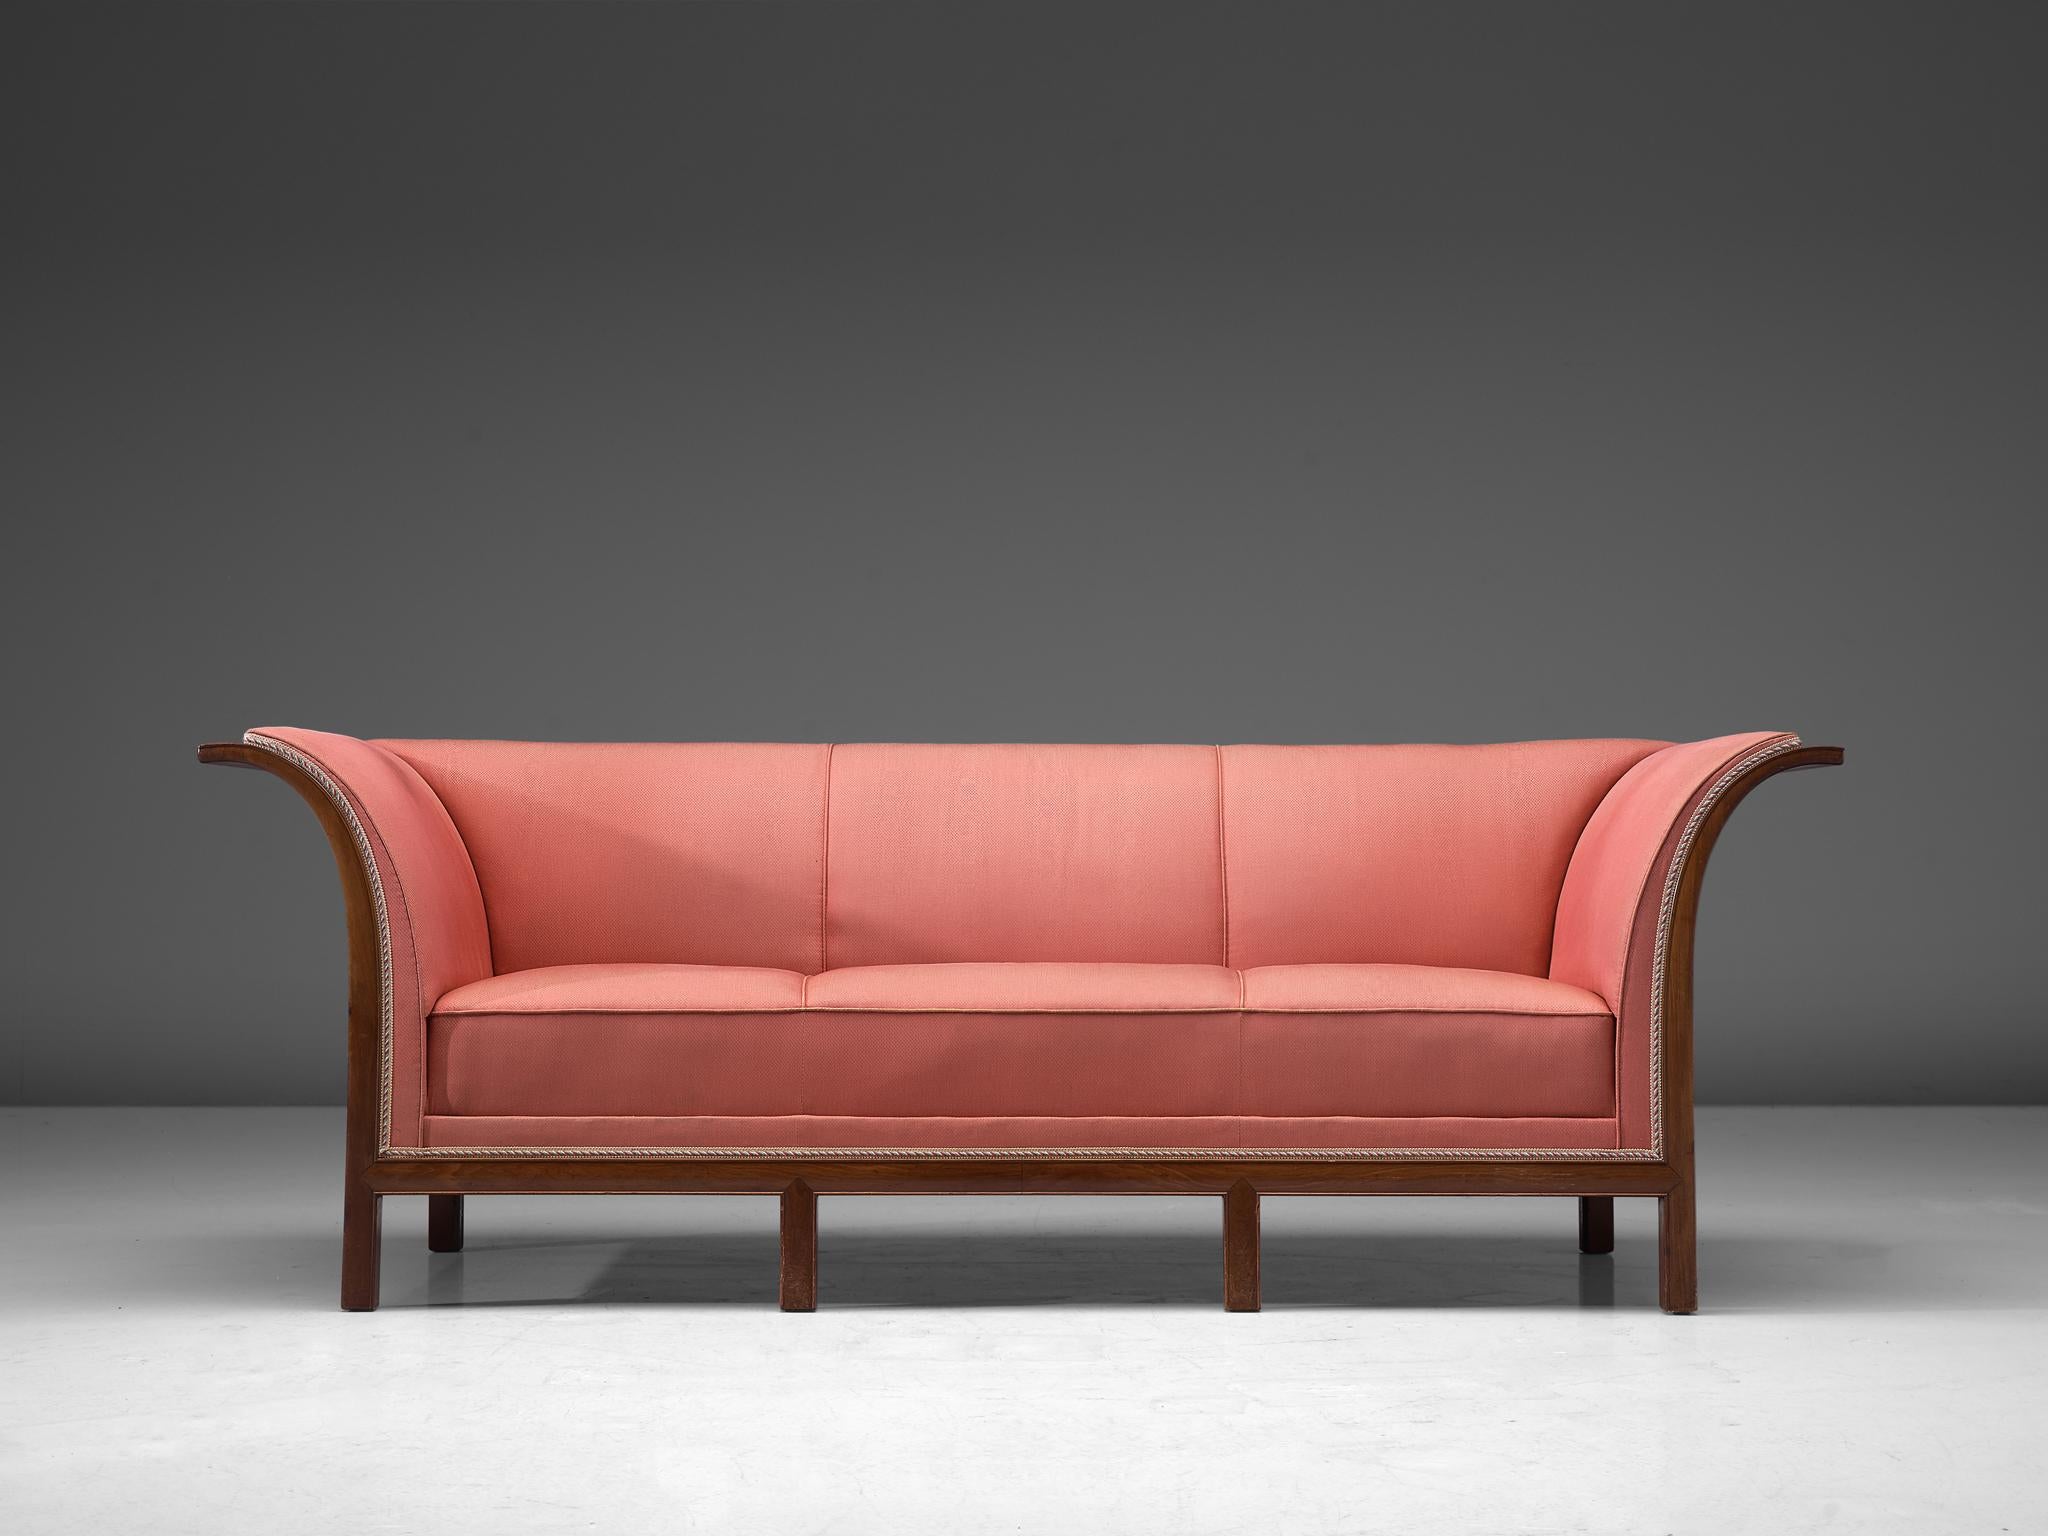 Frits Henningsen, sofa, mahogany, pink fabric, Denmark, 1930s

This classic sofa was designed and produced by master cabinet maker Frits Henningsen around the 1930s. The basic design is well-balanced, showing an interesting contrast between the